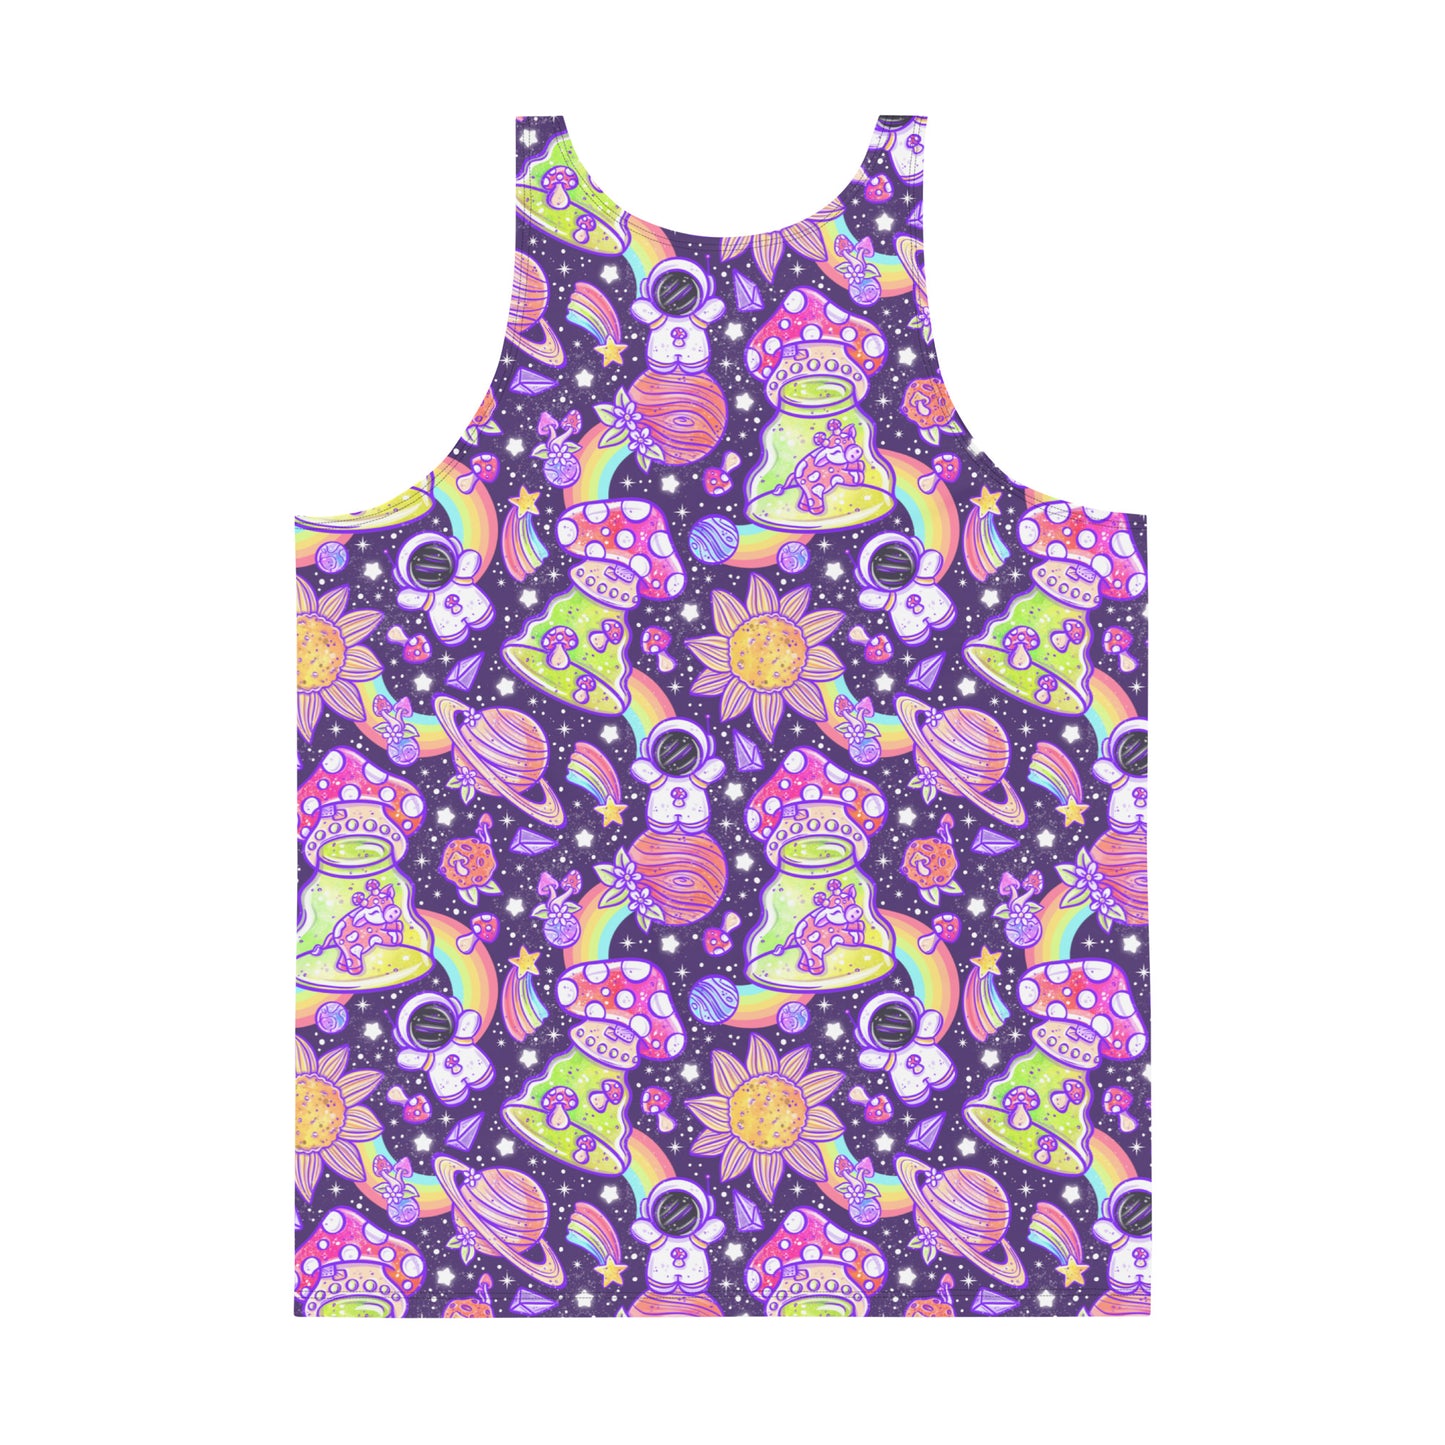 Space Shrooms Mens Rave Tank Top, Plus Sizes Available